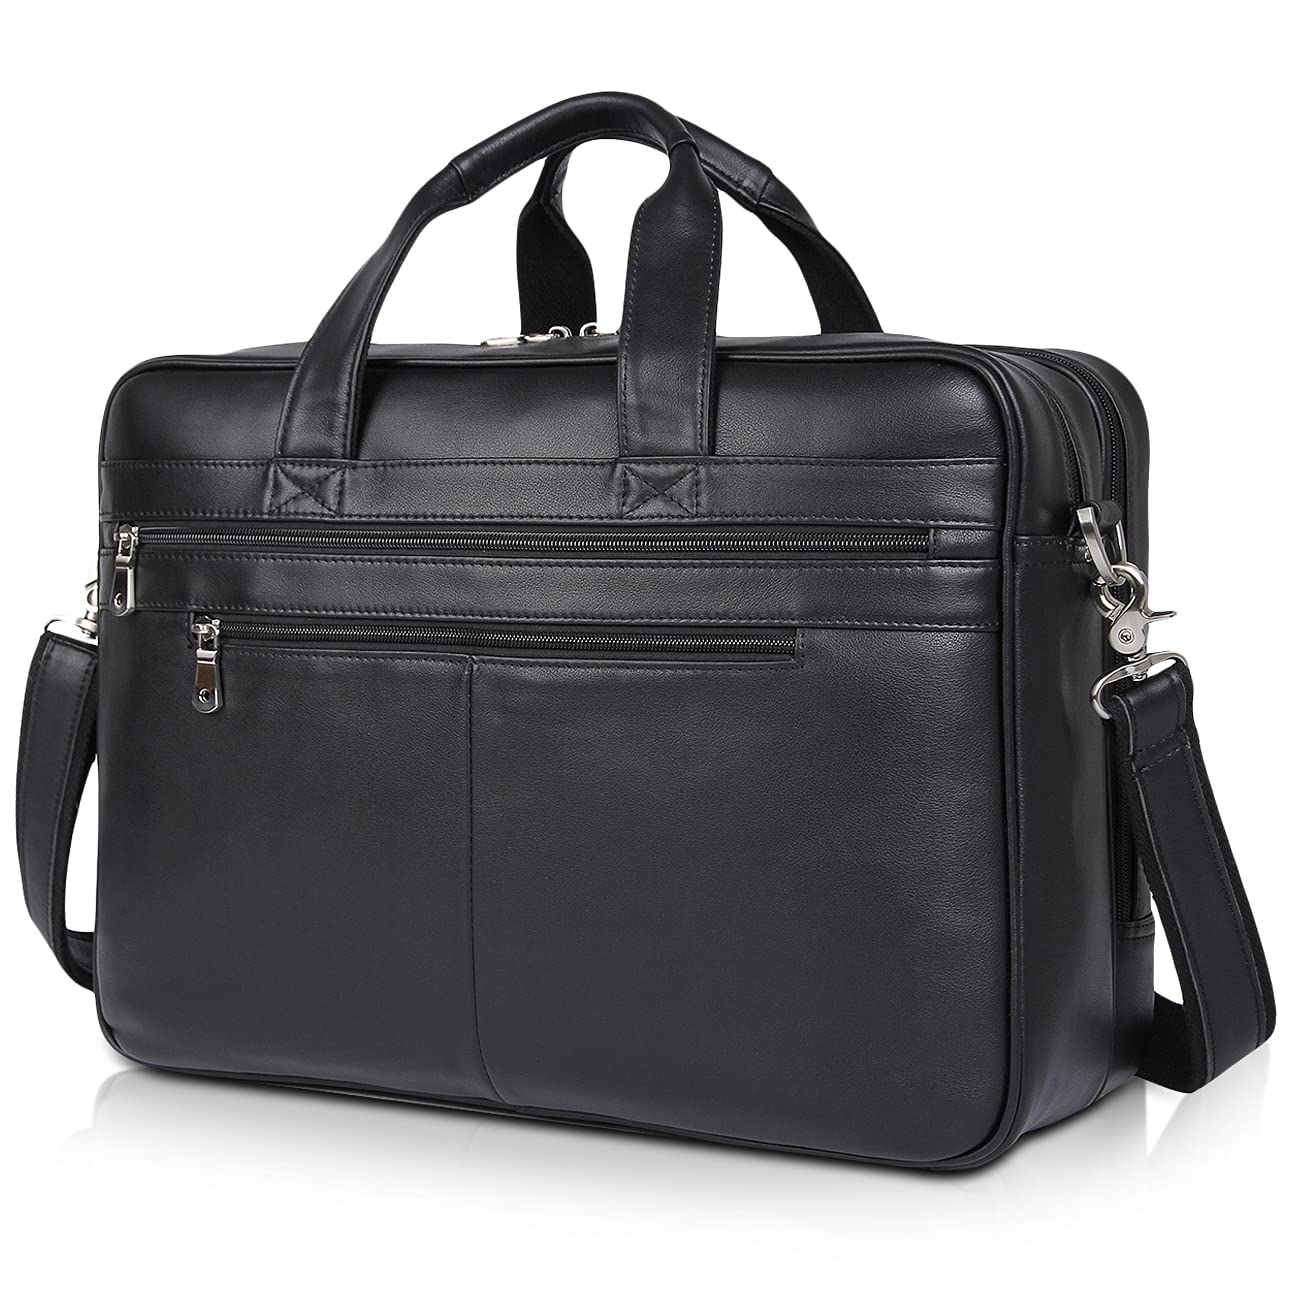 Polare 17'' Computer Briefcase Work Bag Business Case For Men With Full Grain Leather Fits 15.6'' Laptop